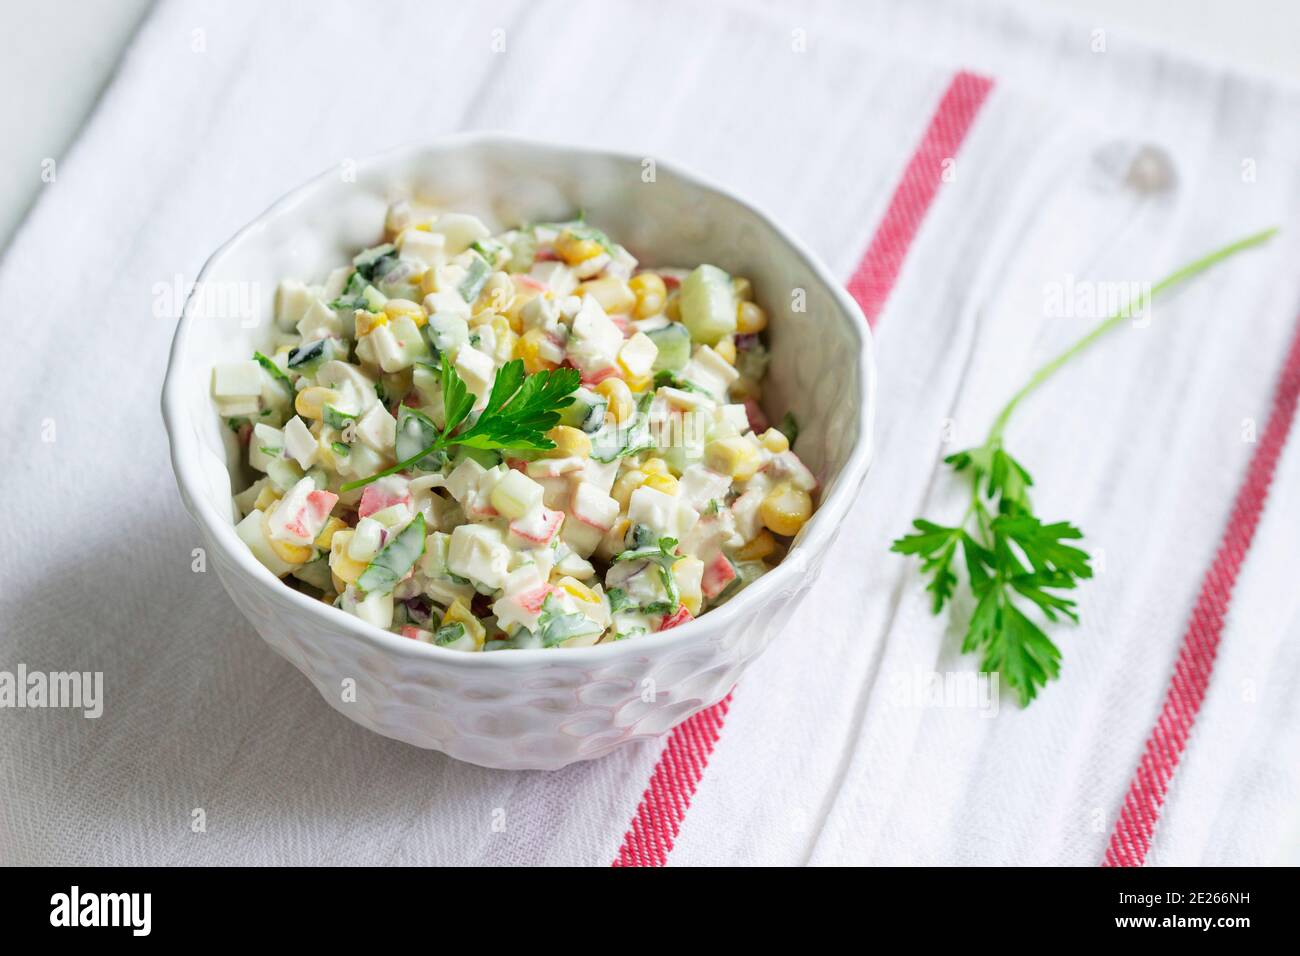 Vegetable salad with crab sticks, dressed with mayonnaise. Stock Photo